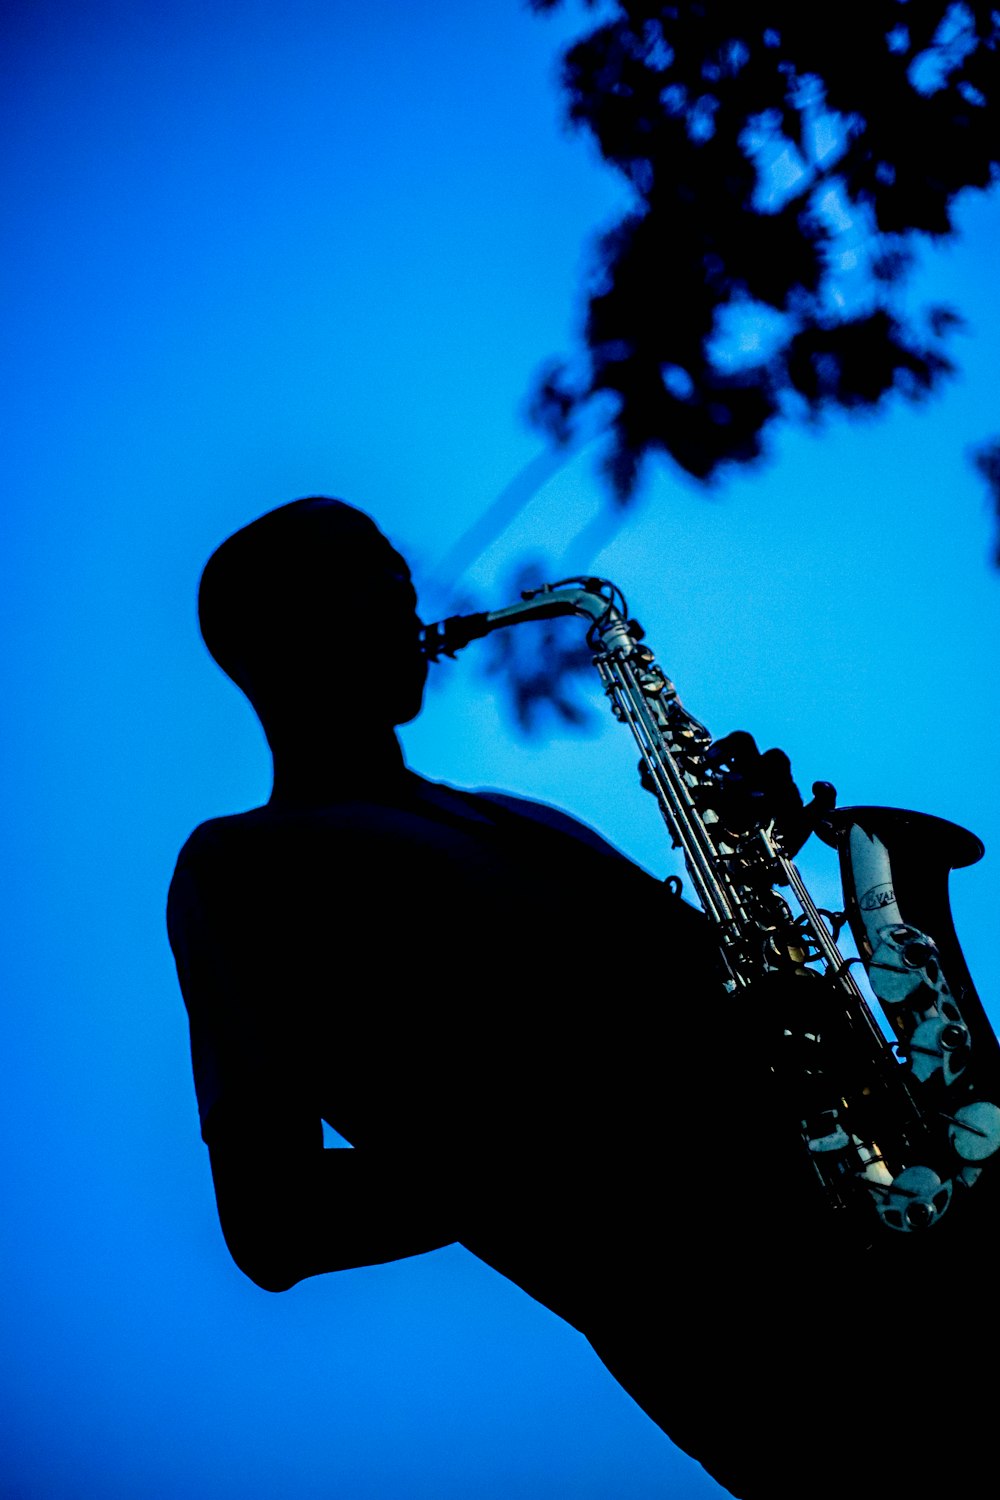 a silhouette of a man playing a saxophone